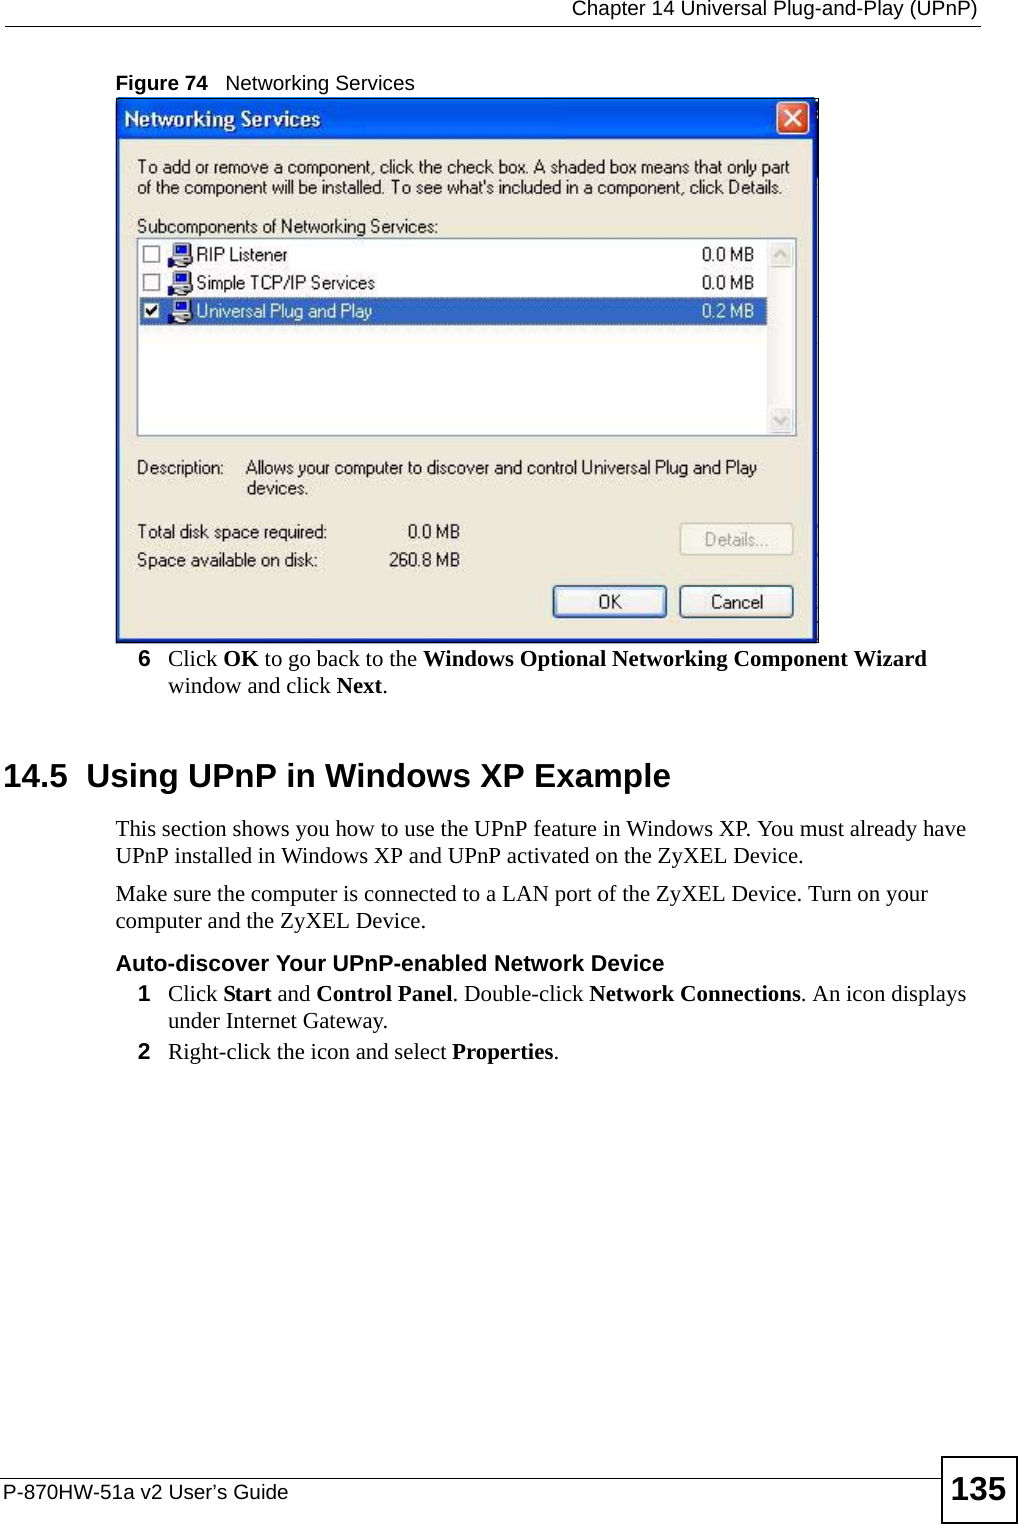  Chapter 14 Universal Plug-and-Play (UPnP)P-870HW-51a v2 User’s Guide 135Figure 74   Networking Services6Click OK to go back to the Windows Optional Networking Component Wizard window and click Next. 14.5  Using UPnP in Windows XP ExampleThis section shows you how to use the UPnP feature in Windows XP. You must already have UPnP installed in Windows XP and UPnP activated on the ZyXEL Device.Make sure the computer is connected to a LAN port of the ZyXEL Device. Turn on your computer and the ZyXEL Device. Auto-discover Your UPnP-enabled Network Device1Click Start and Control Panel. Double-click Network Connections. An icon displays under Internet Gateway.2Right-click the icon and select Properties. 